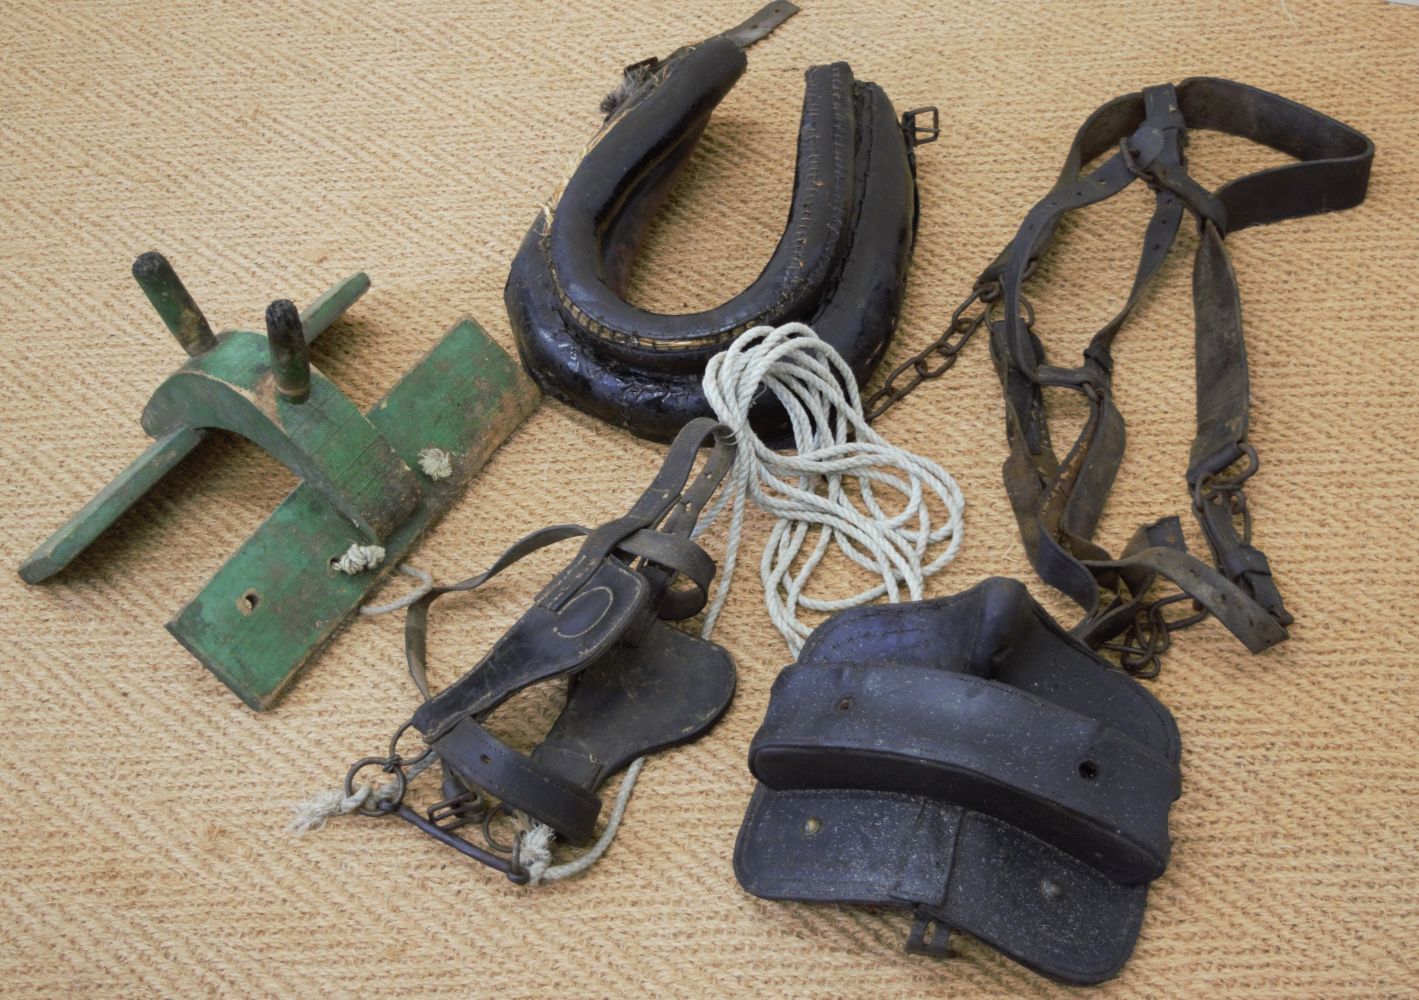 GROUP OF DONKEY HARNESSES